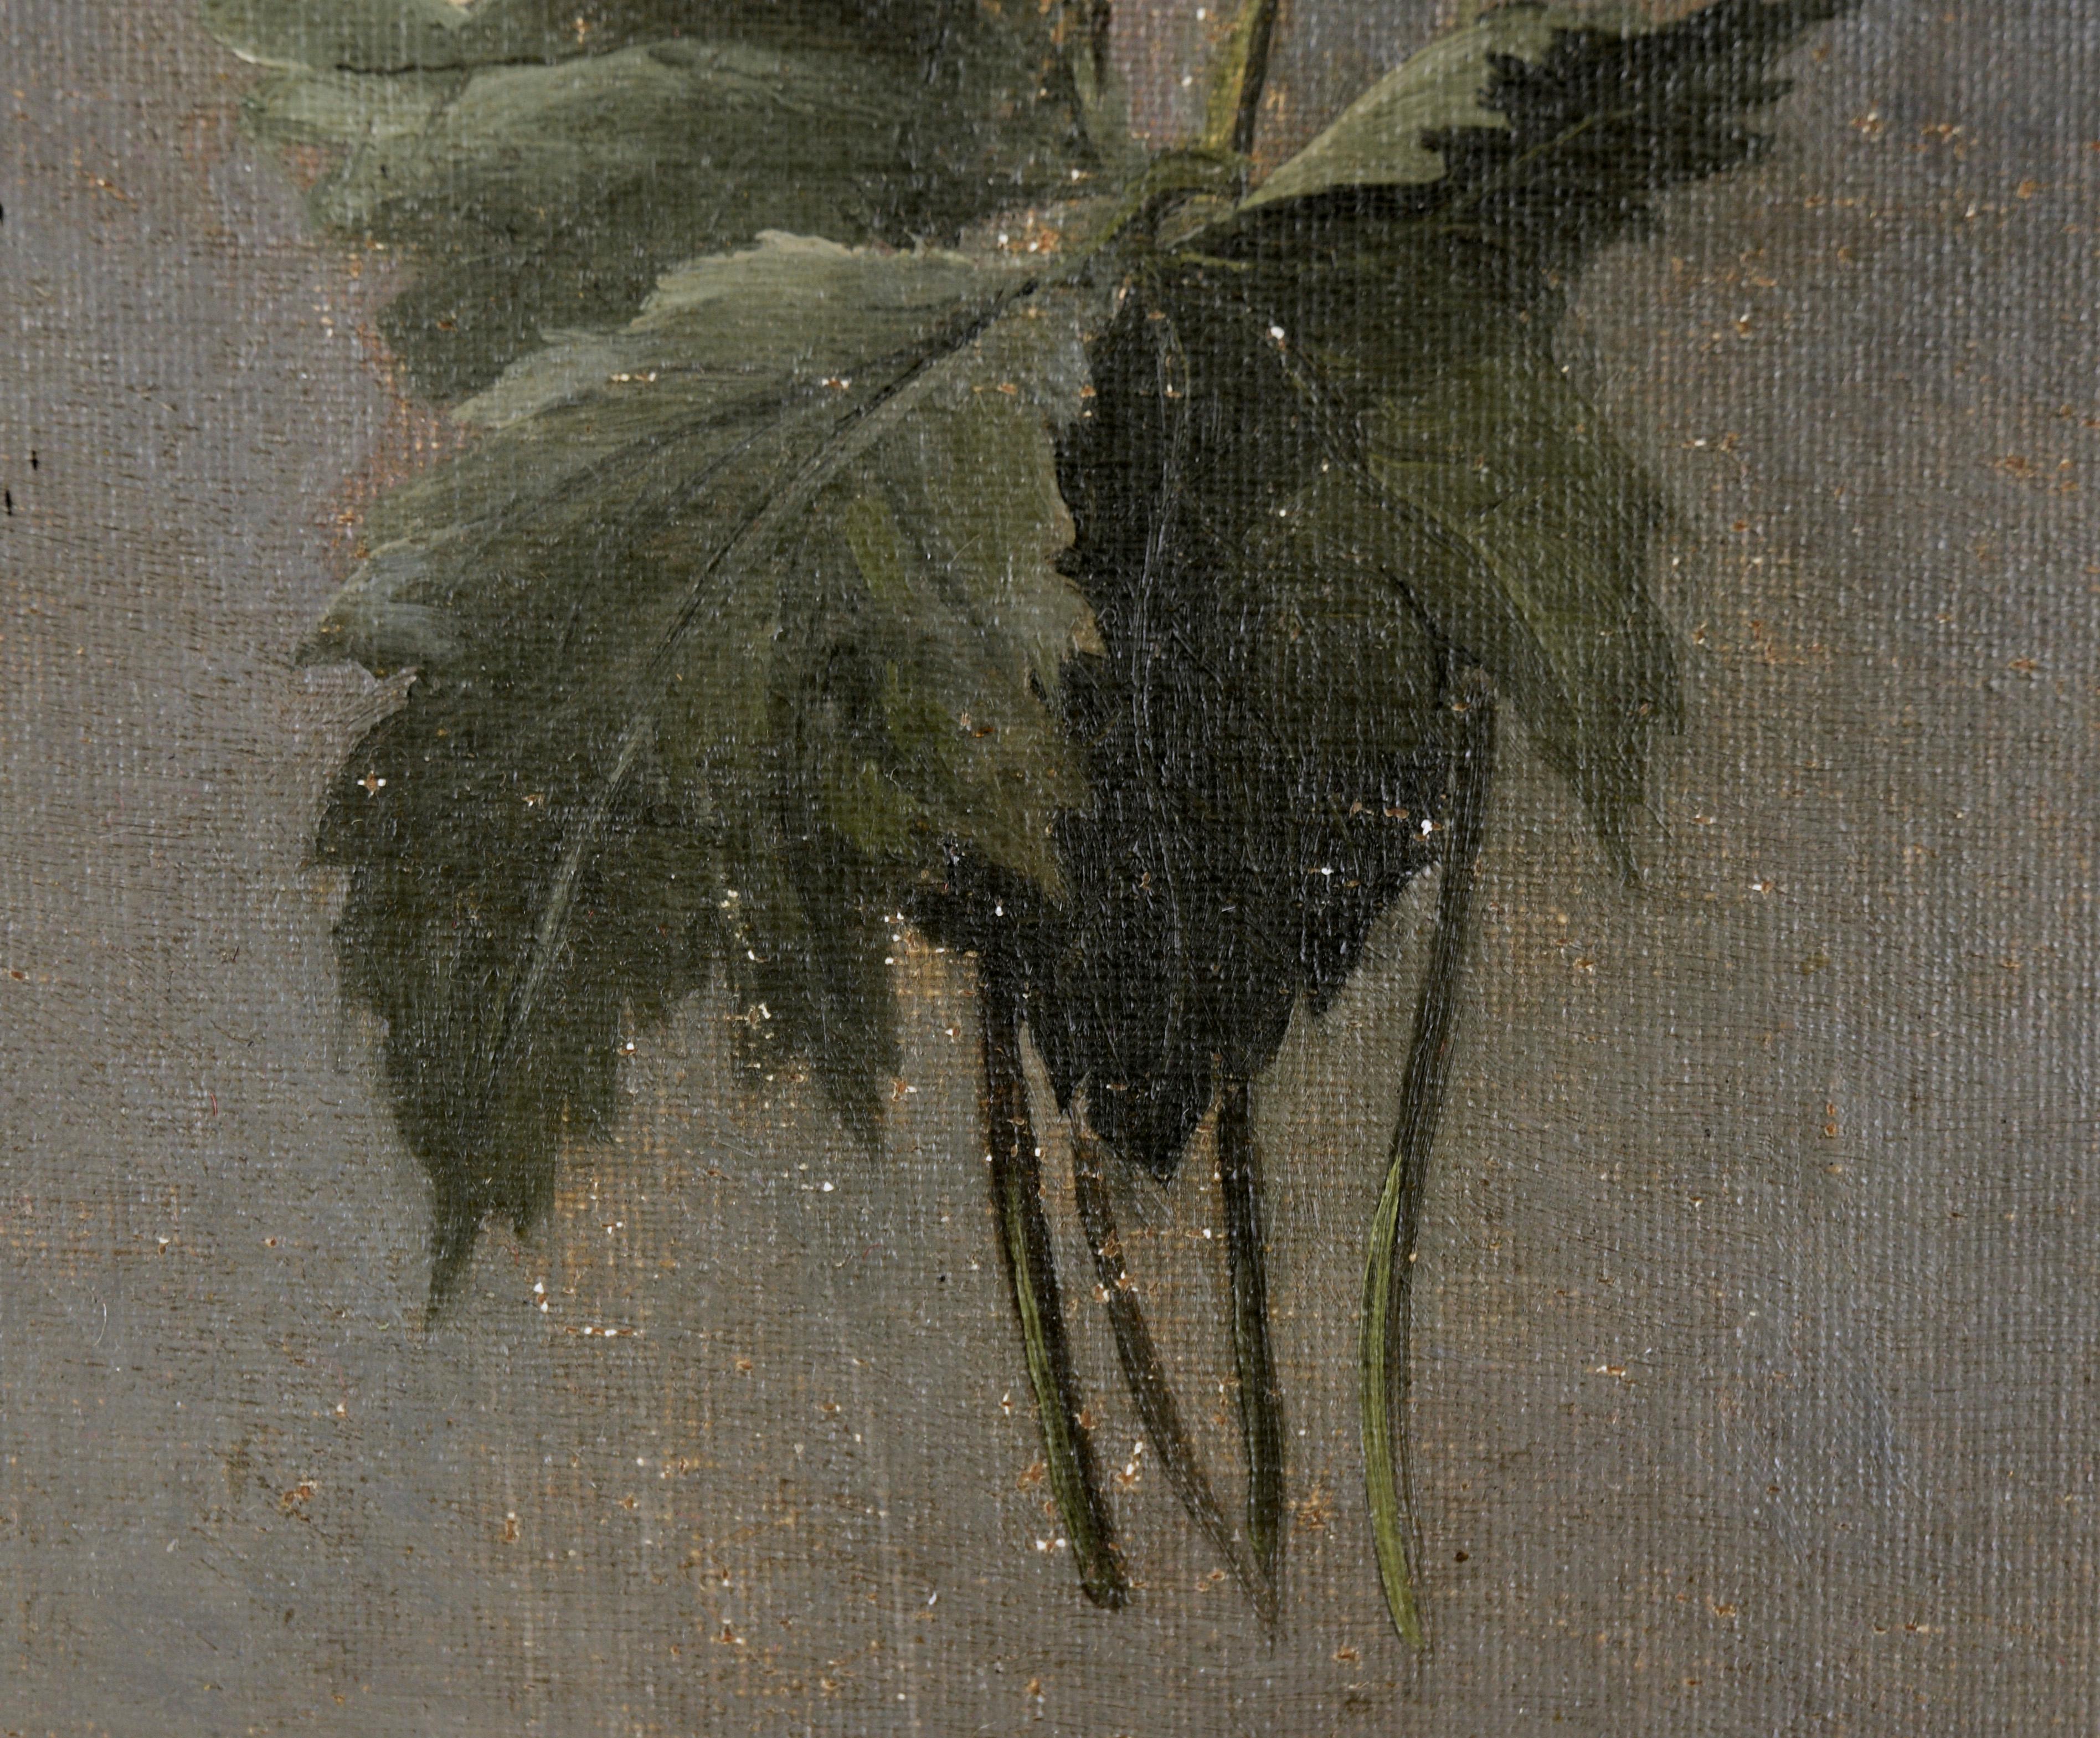 Poppy and Anemone Still Life Floral Study in Oil on Linen - Brown Still-Life Painting by Karl Harald Alfred Broge